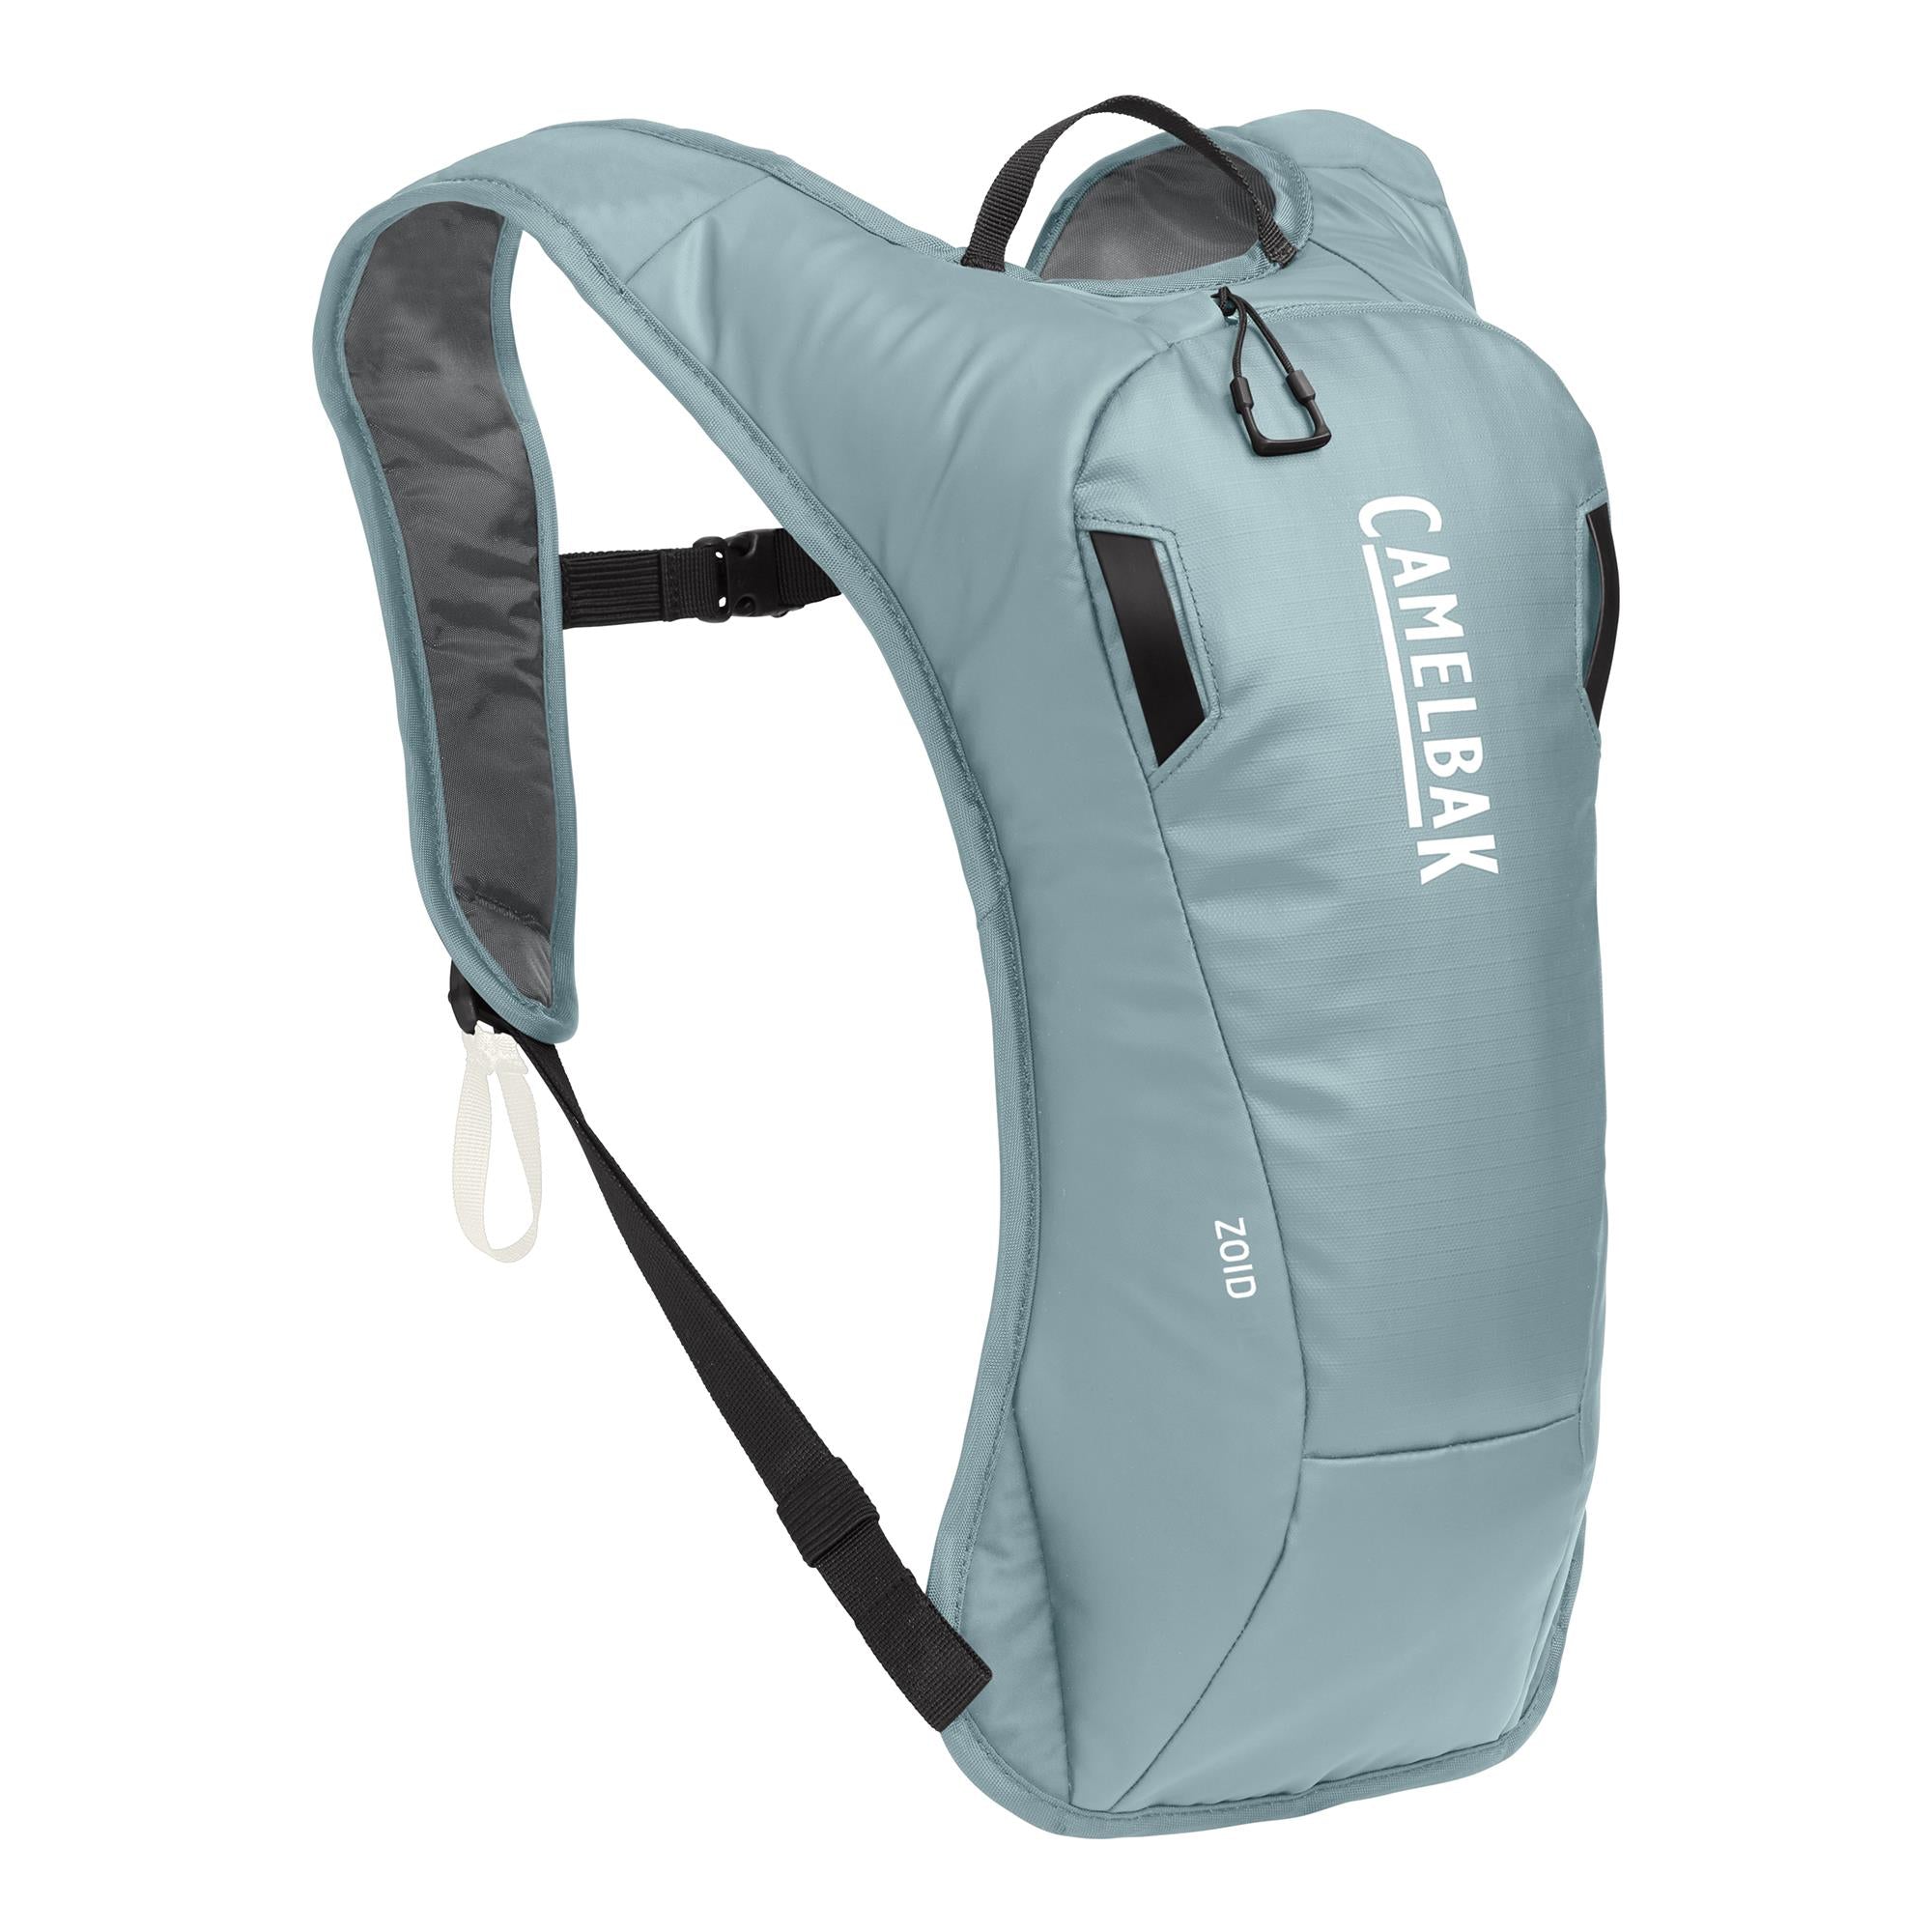 Zoid™ Winter Hydration Pack 1L with 2L Reservoir – CamelBak